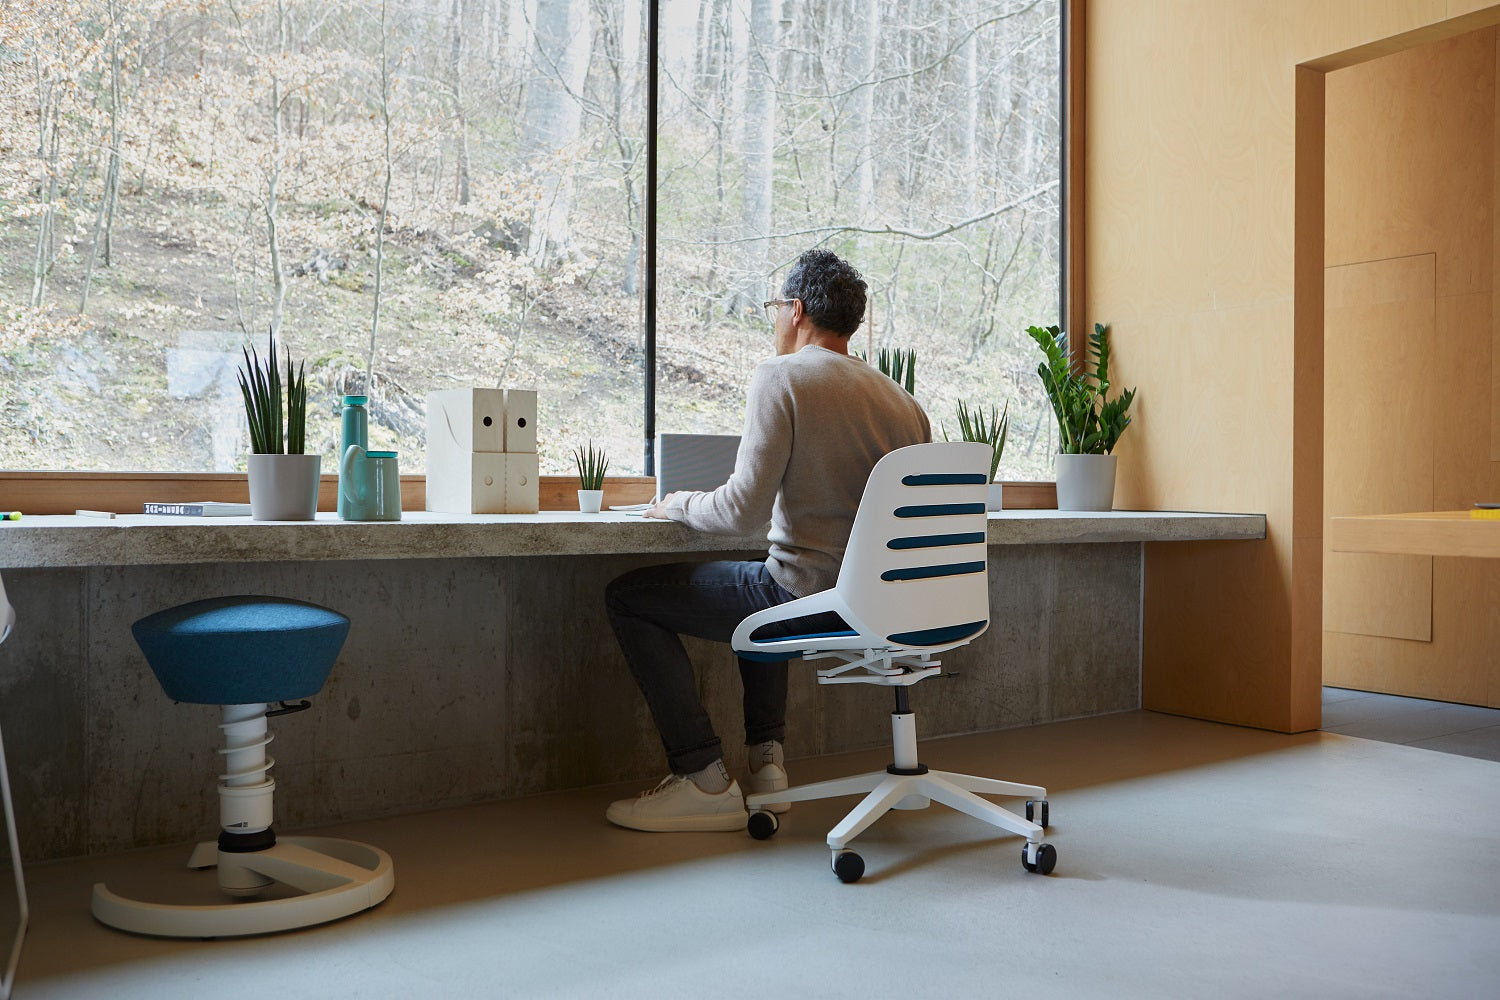 The Aeris Numo Task office chair makes easy movements in all directions.